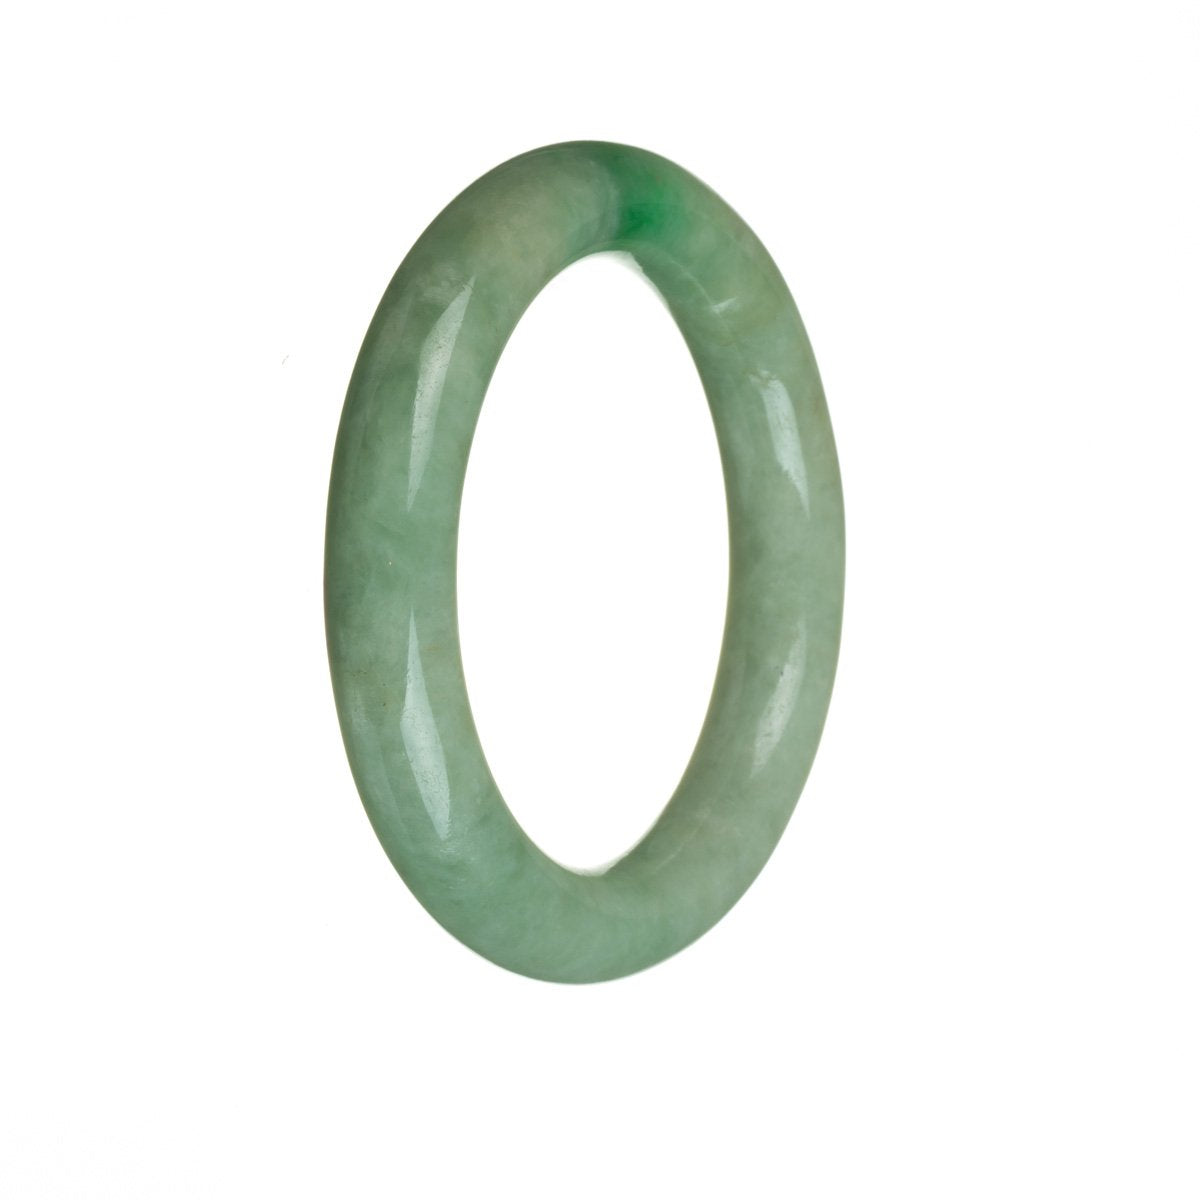 Genuine Natural Green with emerald green Jade Bangle - 54mm Round